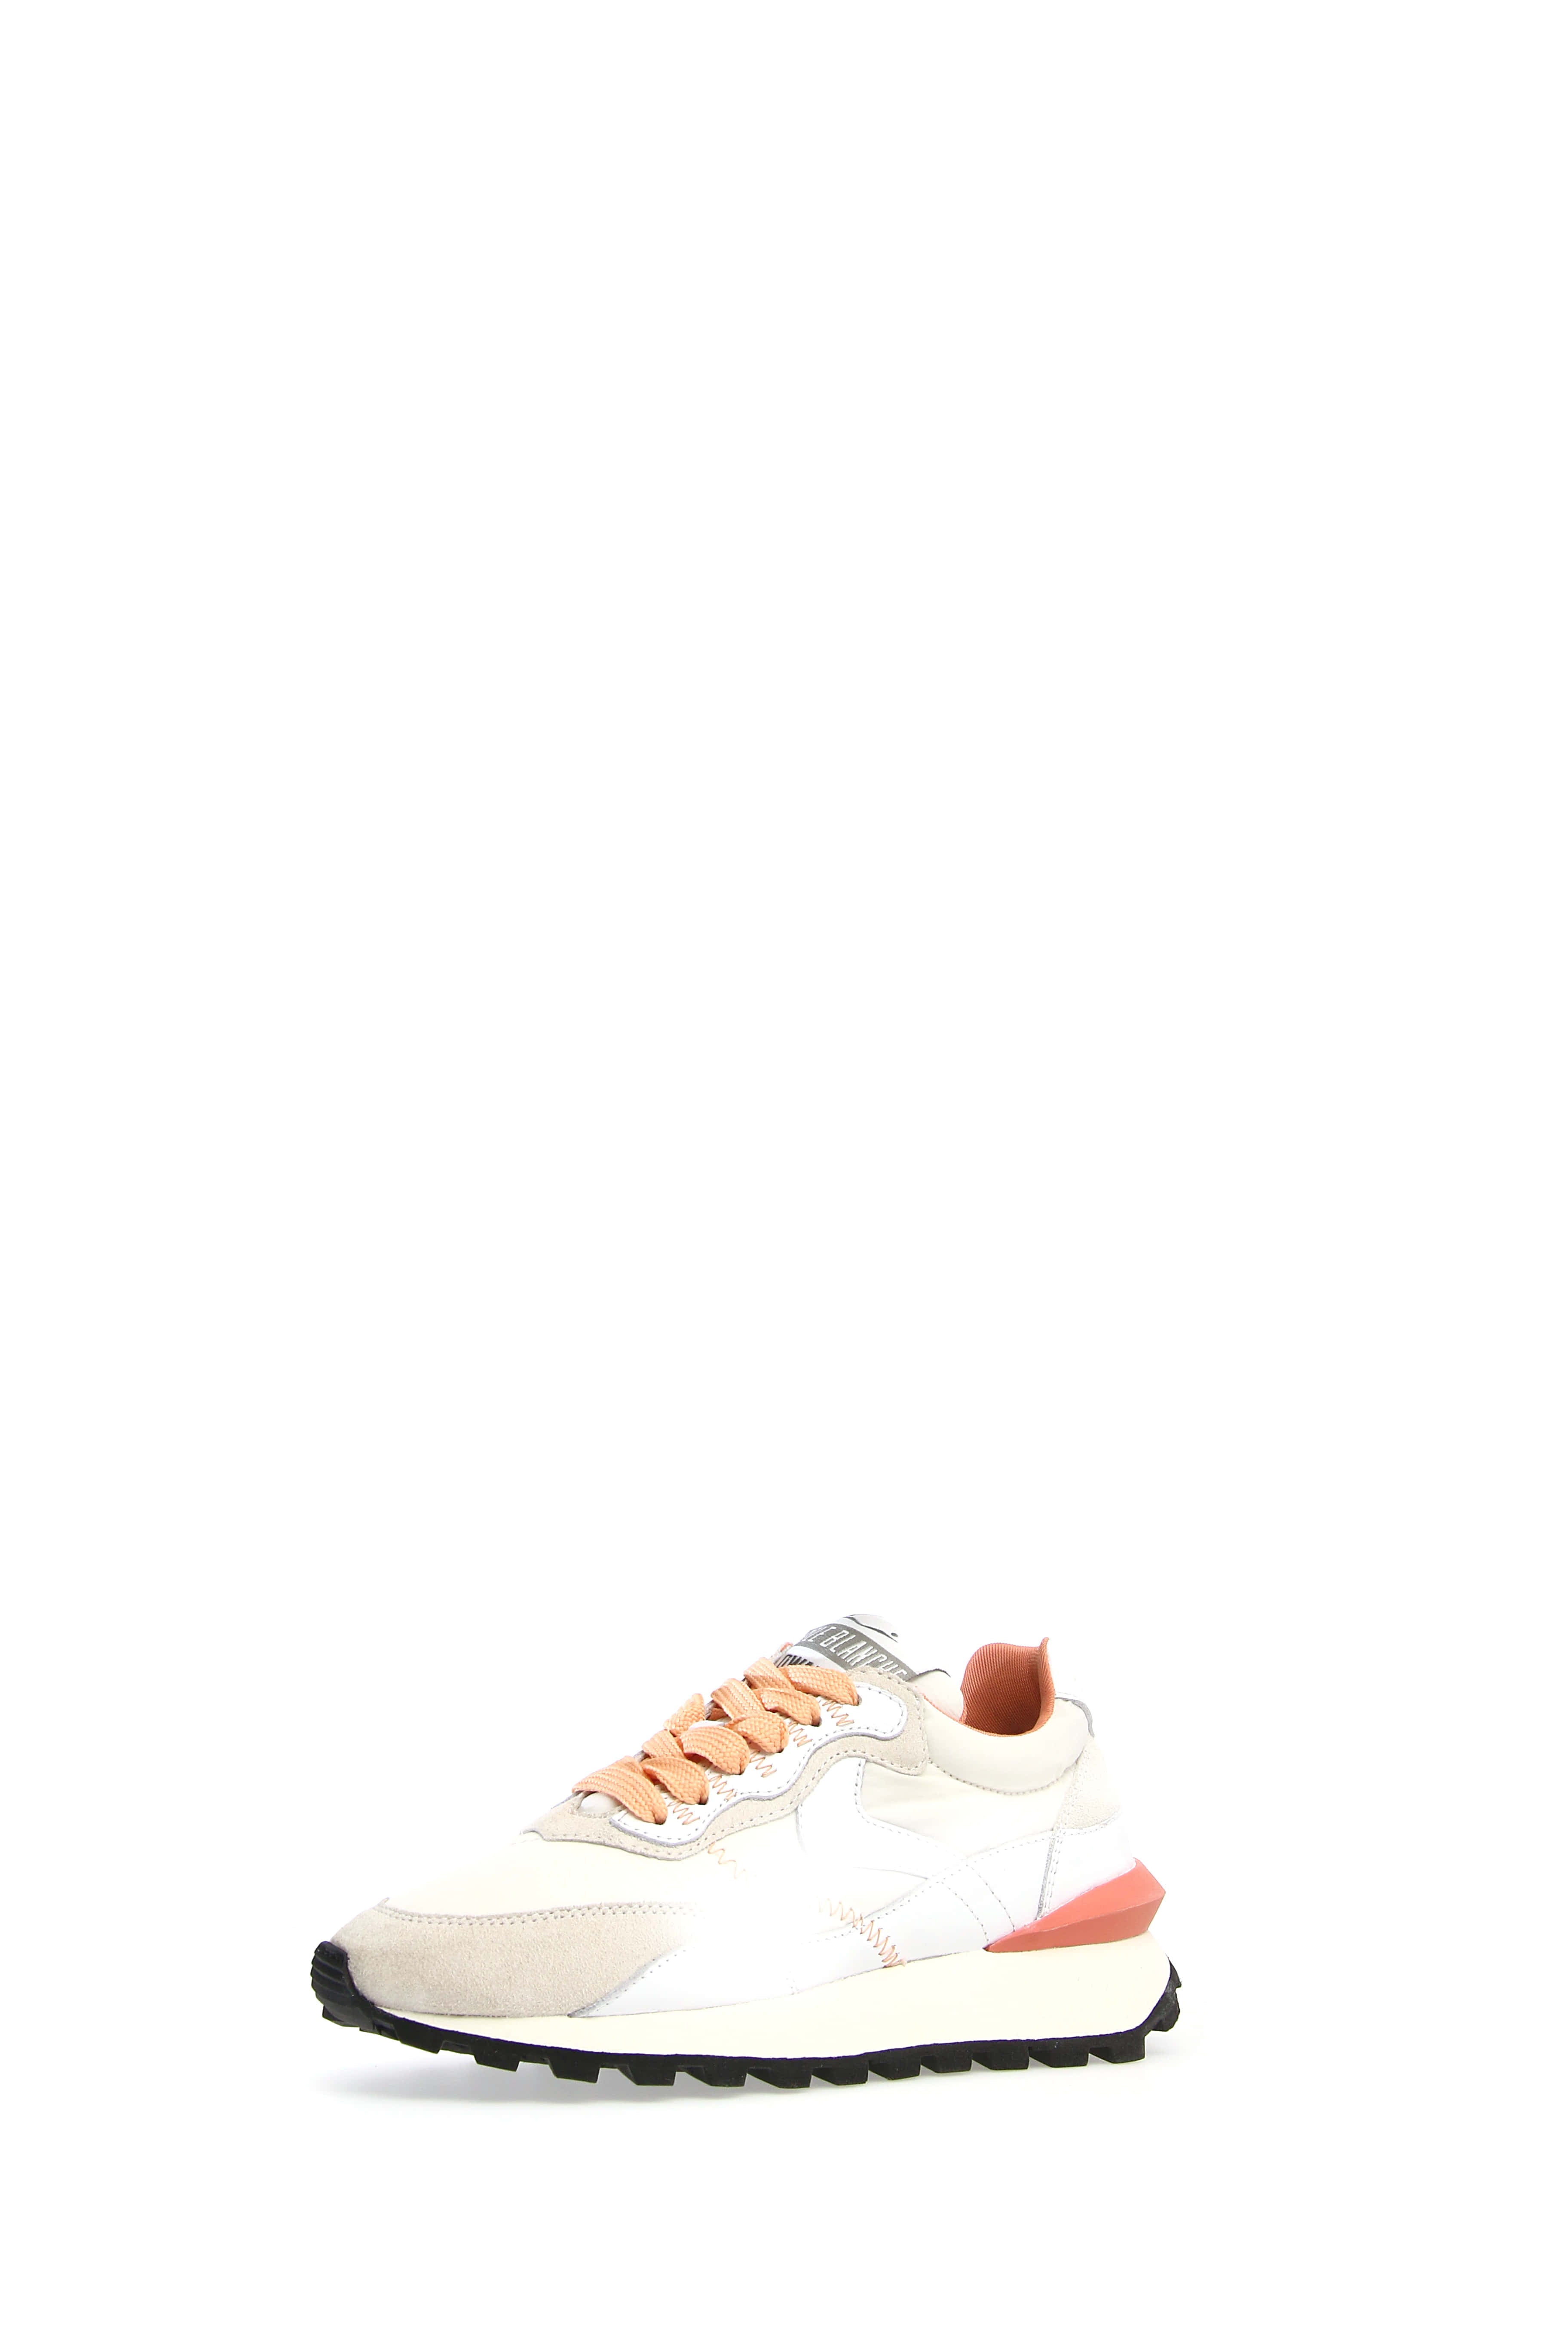 Qwark Hype Suede Off White Chunky Sneakers 2016980050N01 - 2